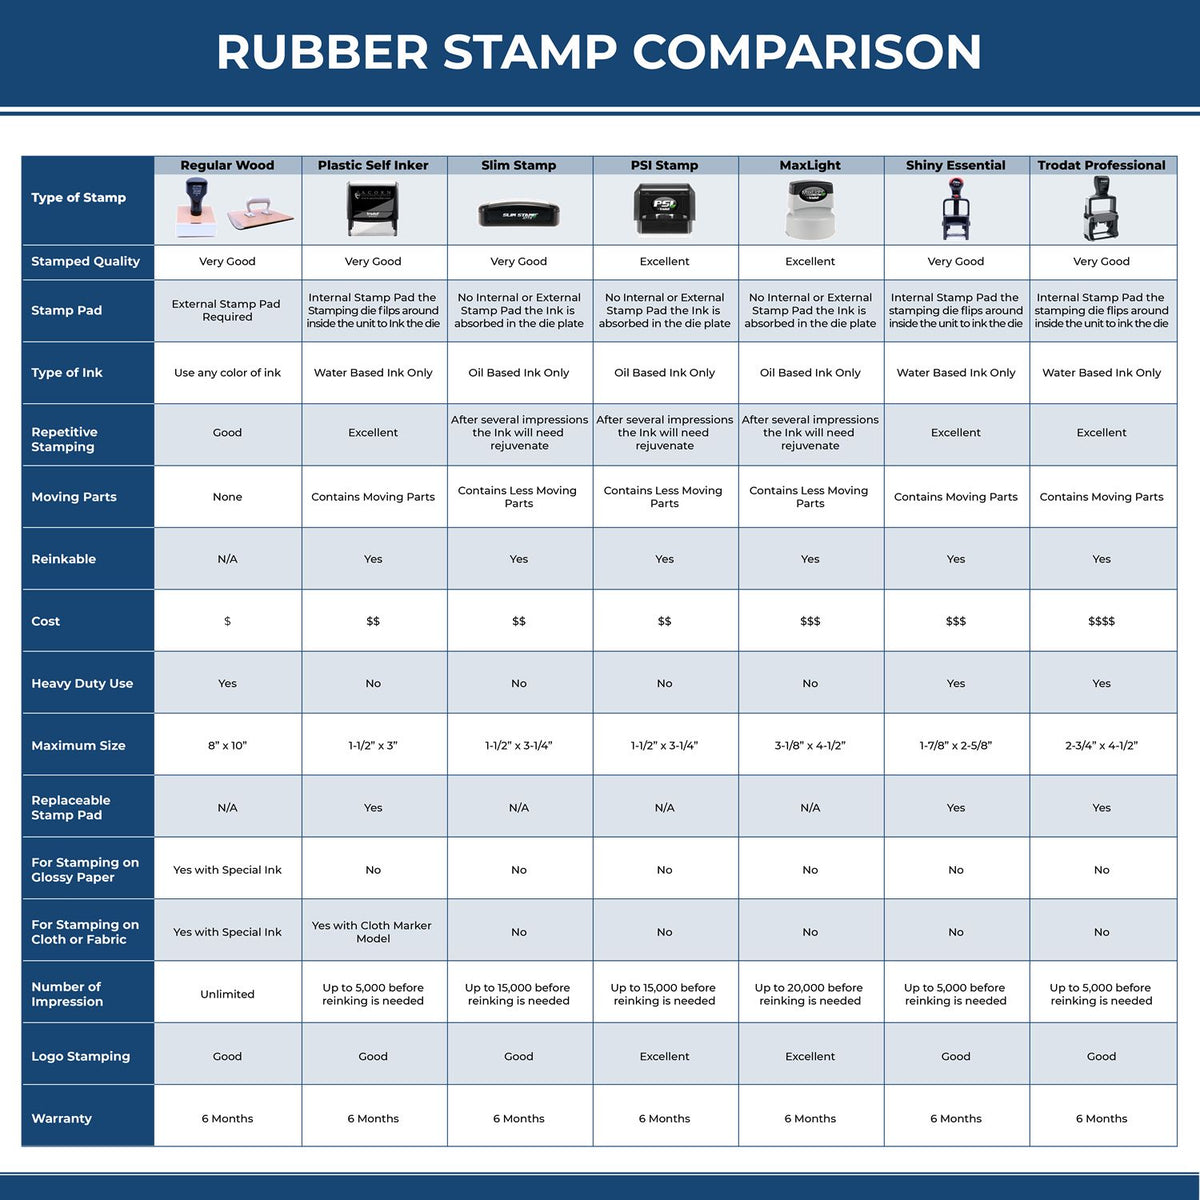 Large Self Inking Atm Stamp 4566S Rubber Stamp Comparison